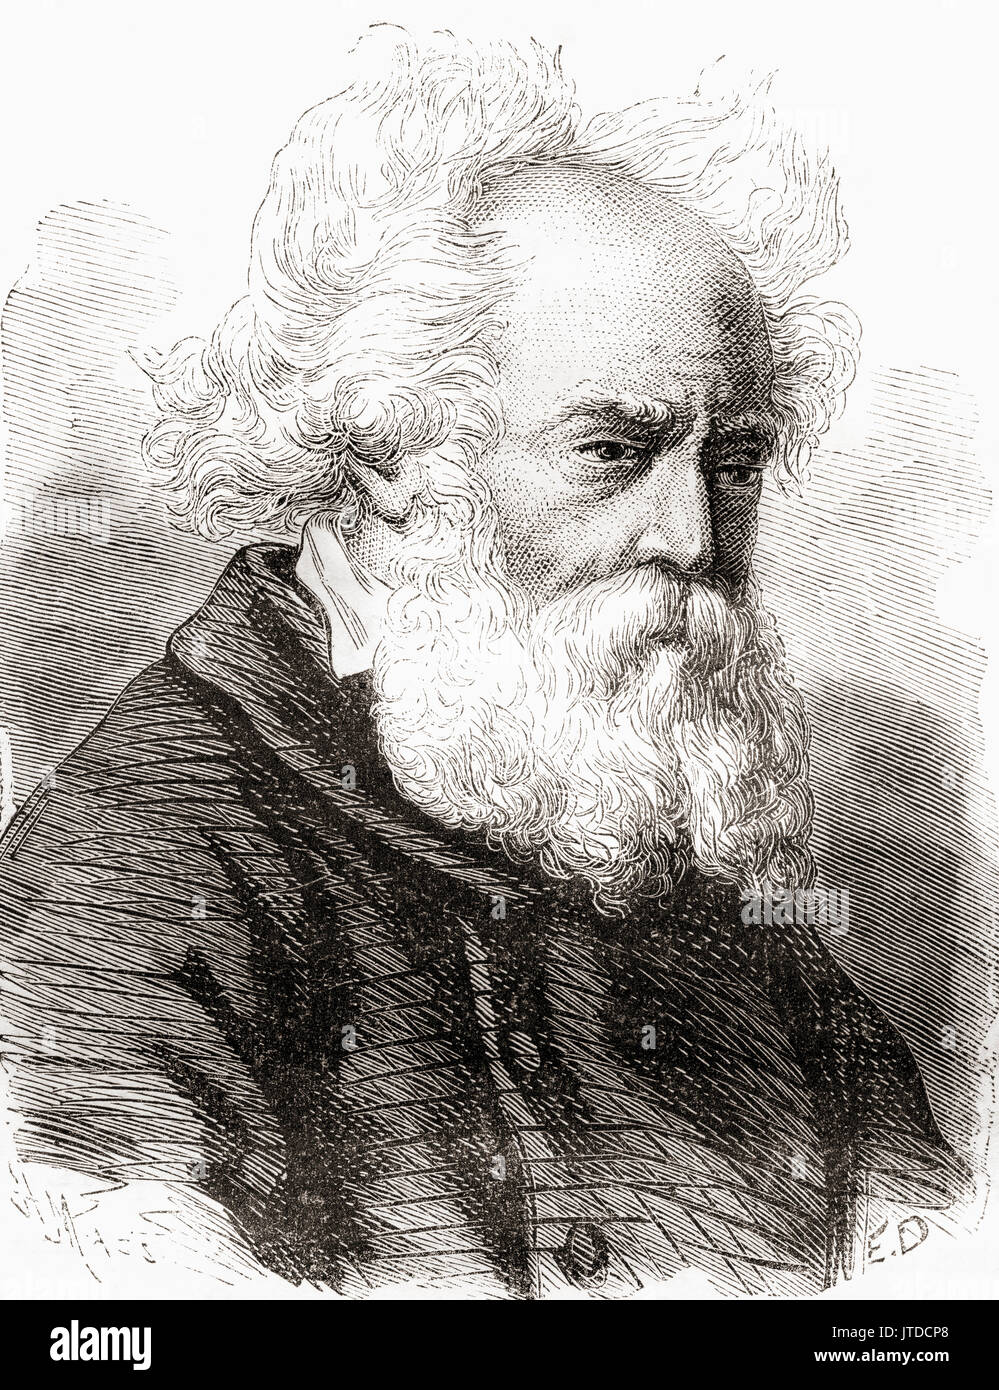 Frédéric Sauvage, 1786 – 1857.  French boat builder who carried out early tests of screw-type marine propellers.  From Les Merveilles de la Science, published 1870. Stock Photo